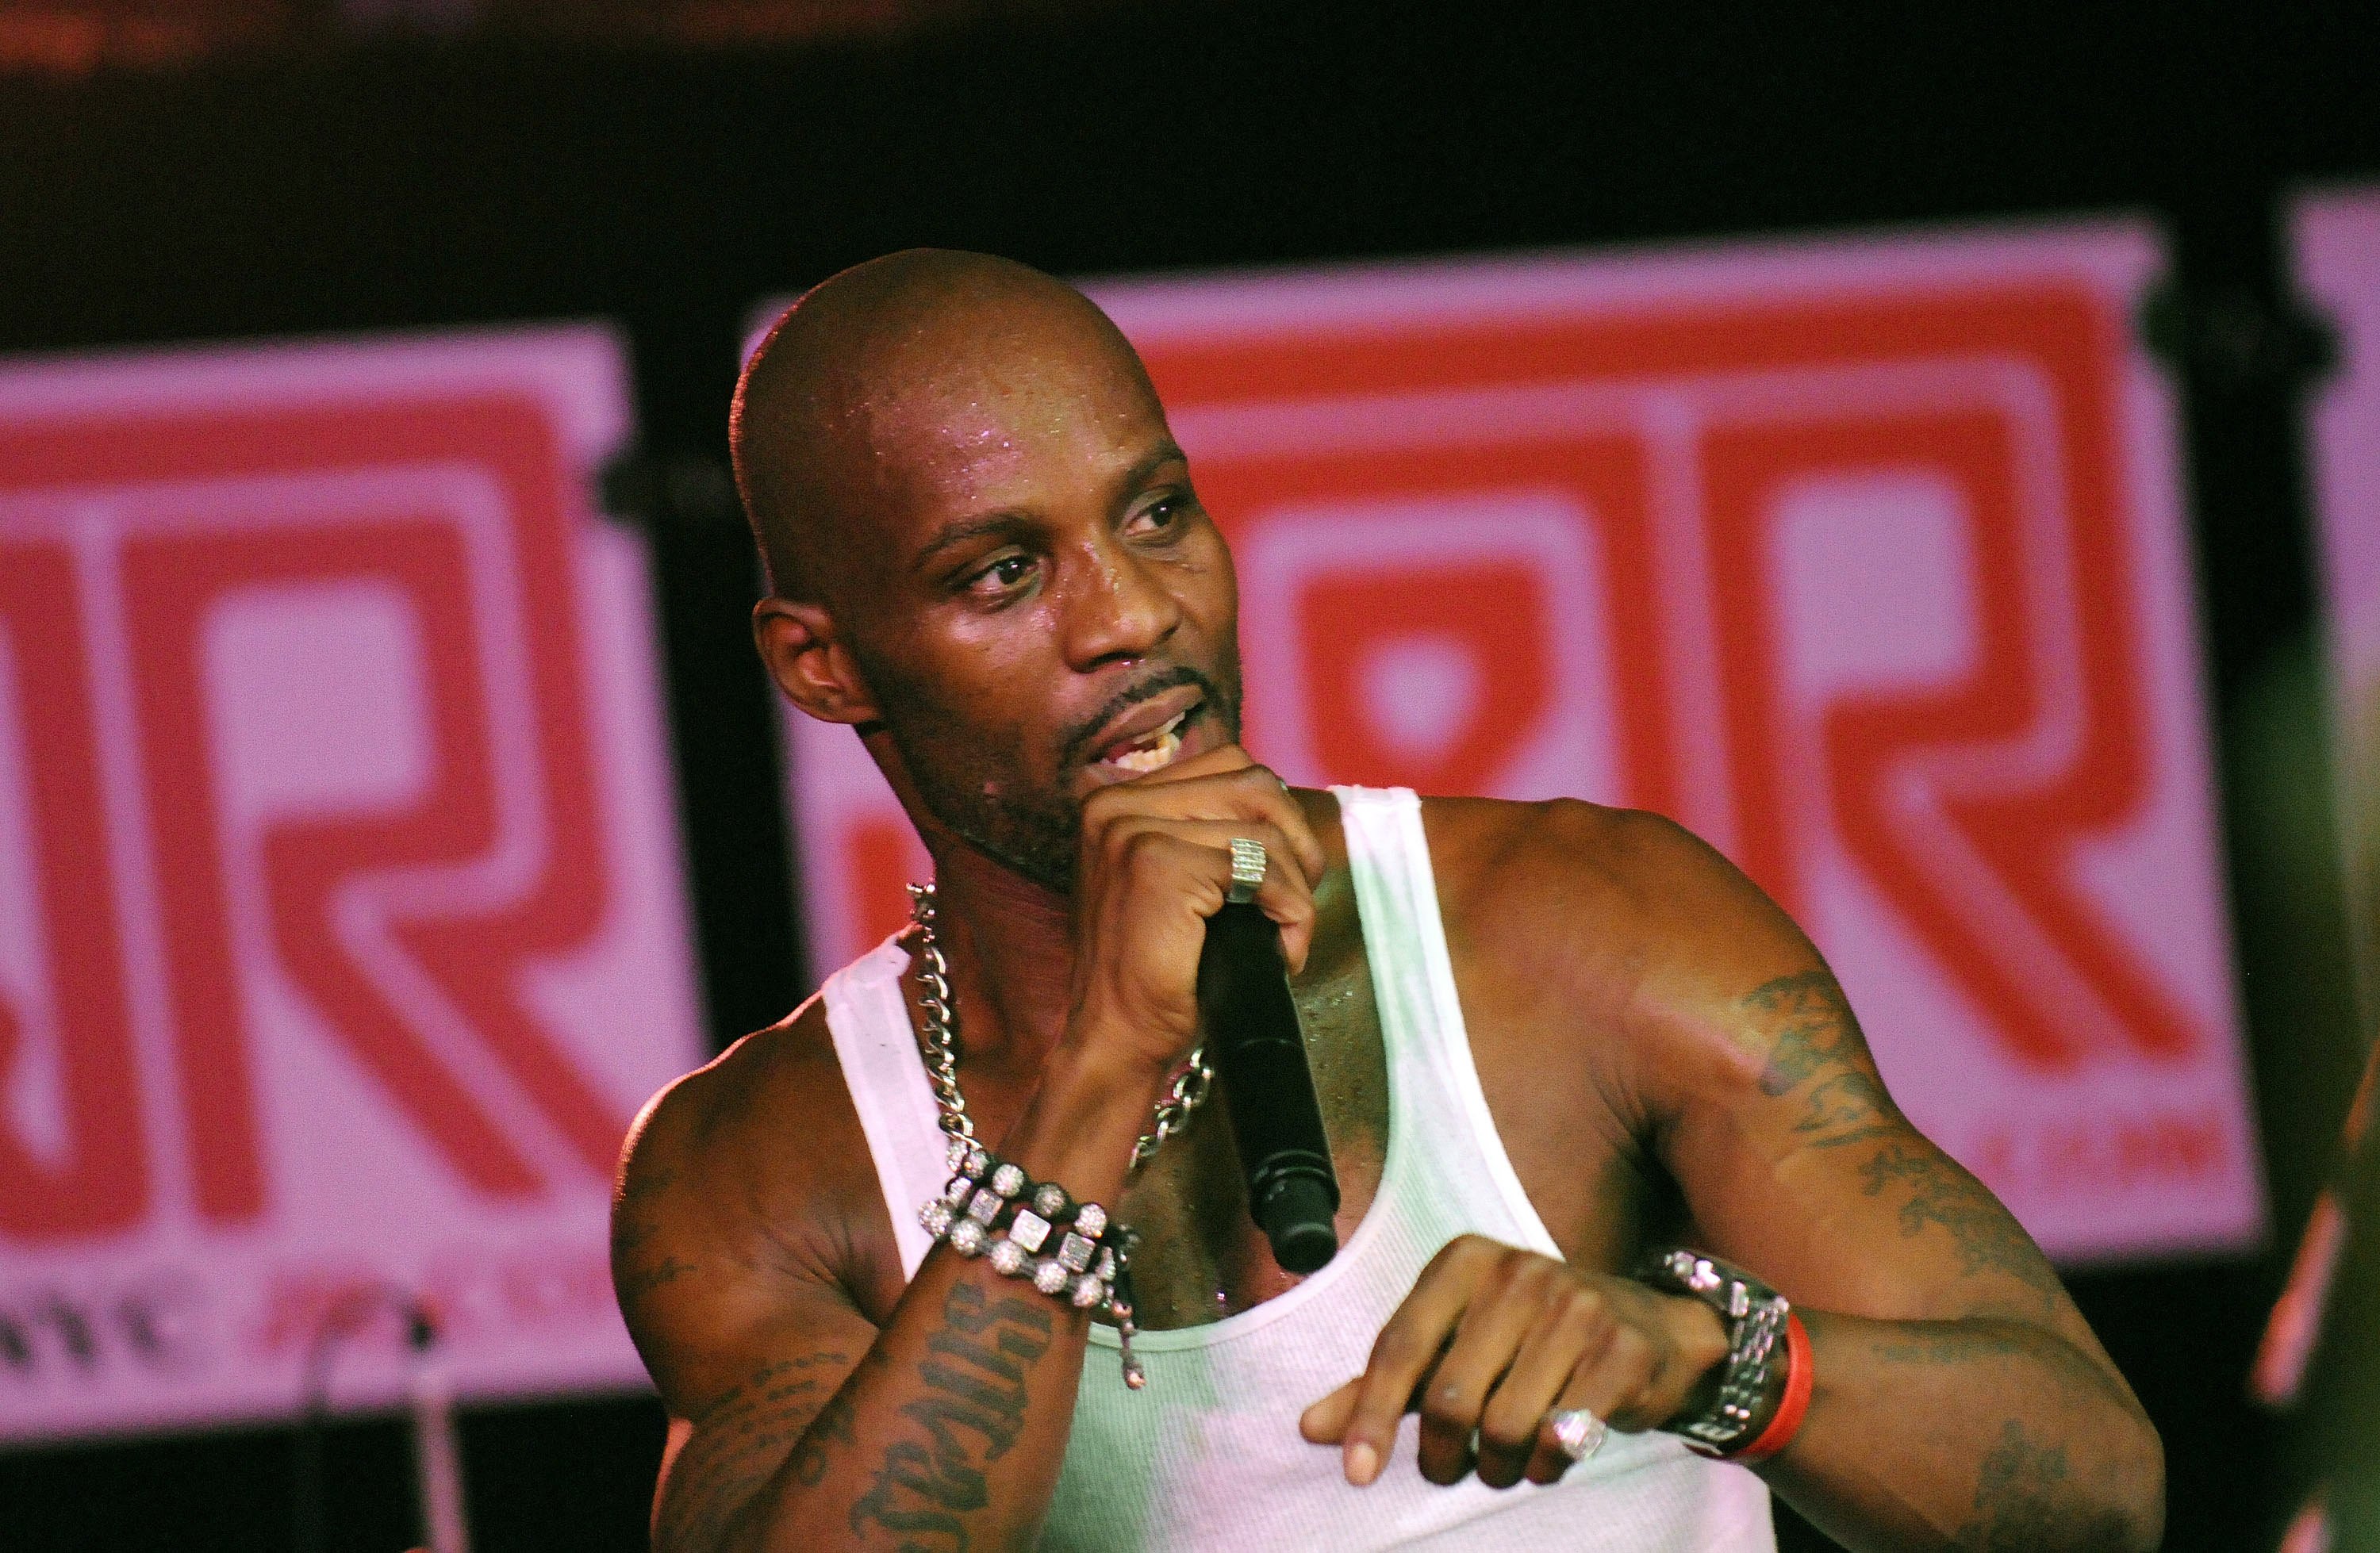 DMX performing at J&R music fest in 2012